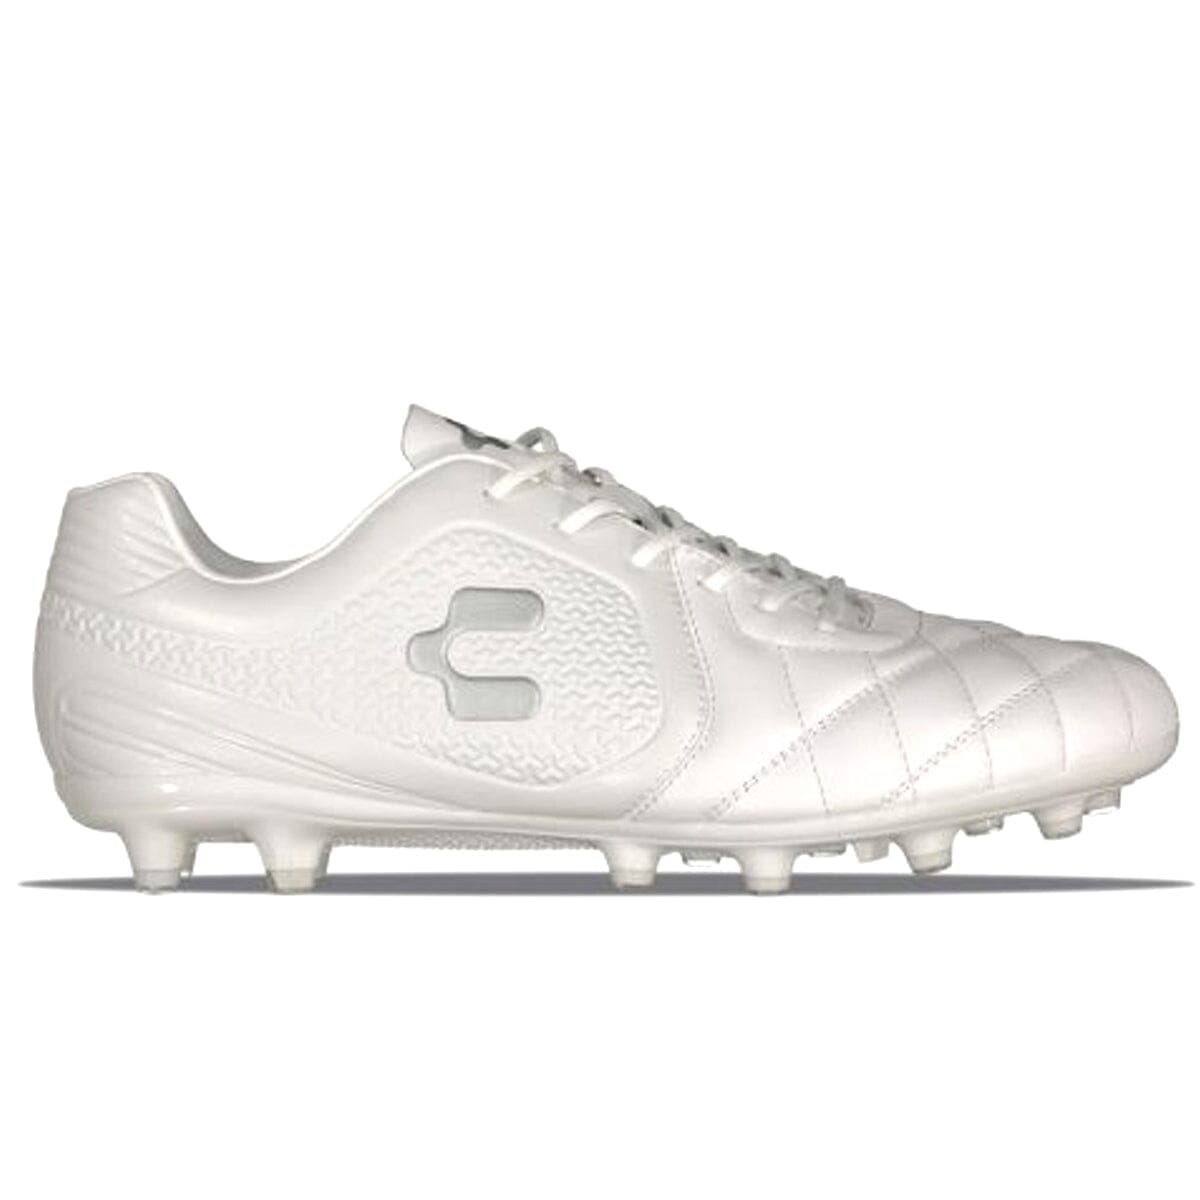 Charly Legendario 2.0 LT Firm Ground Soccer Cleats | 1086573001 Cleats Charly 8 White 